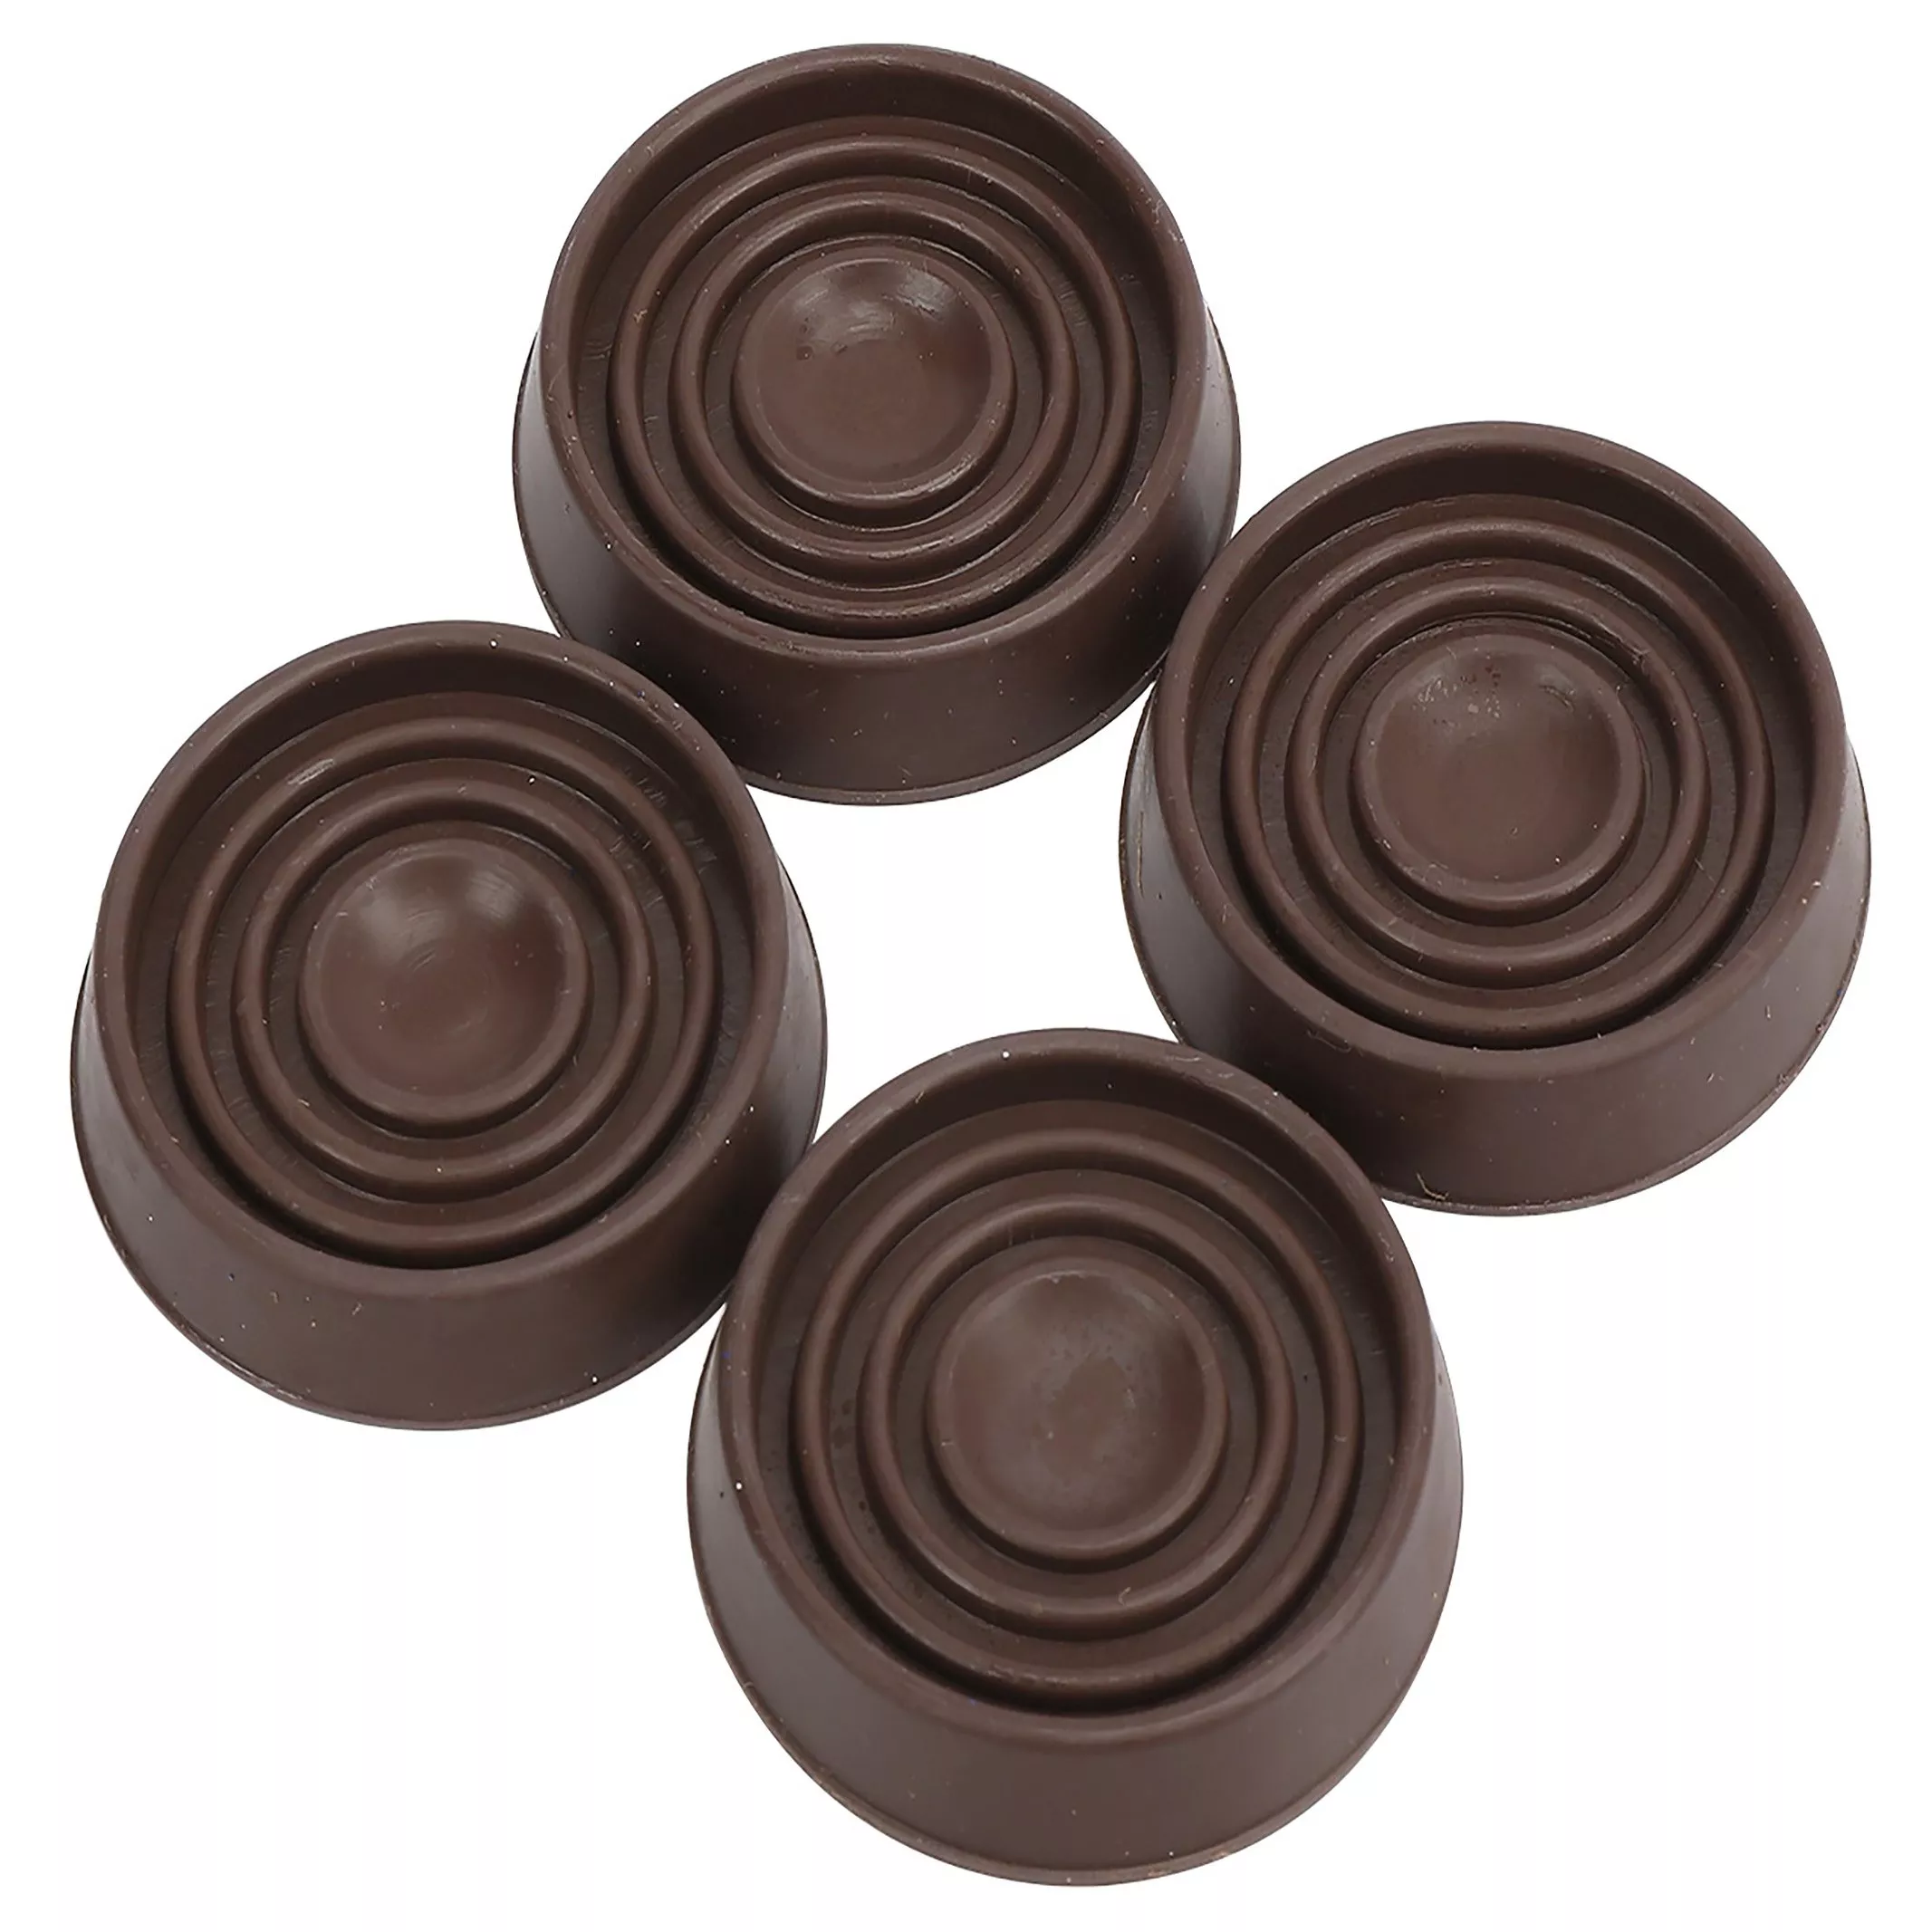 Work Pro 1-3/4in. Small Round Furniture Caps - 4pk.